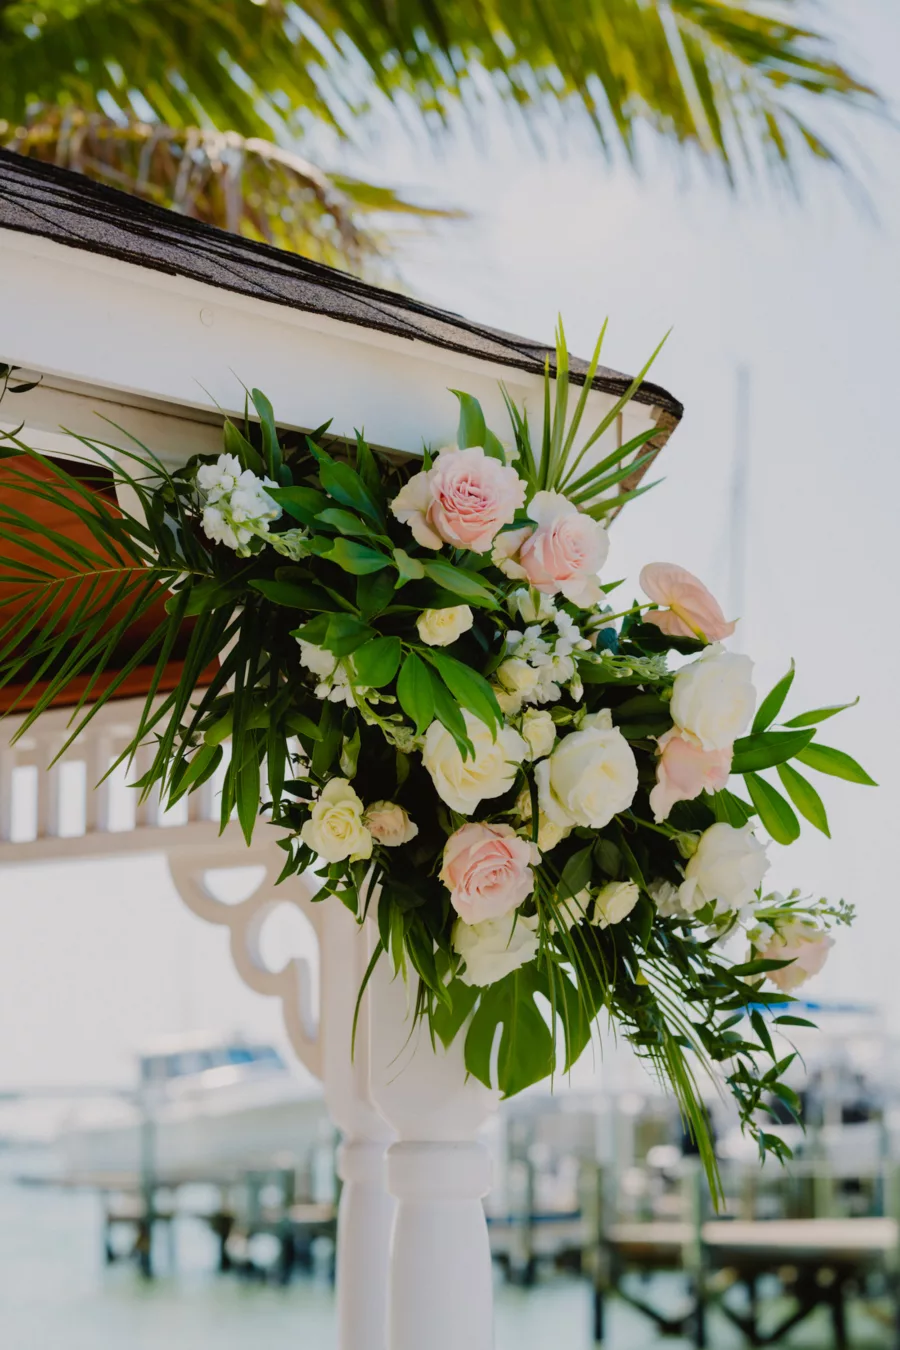 Tropical Pink and White Roses, Monstera, Palm Leaf Gazebo Spring Decor Ideas | Tampa Bay Florist Monarch Events and Design